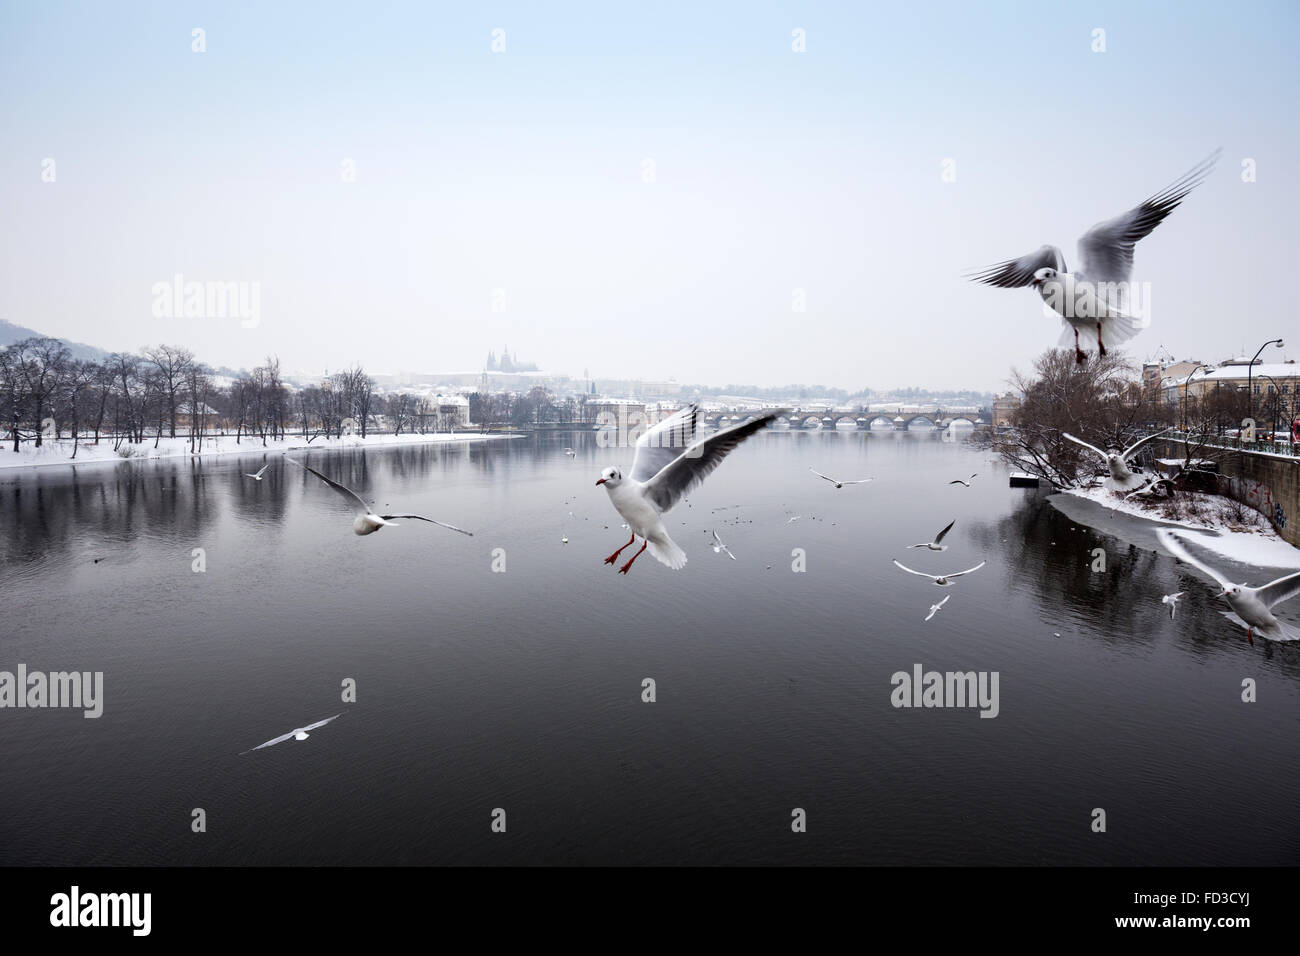 River Moldau with Prague Castle and St. Vitus Cathedral in background in winter time,  Prague, Czech Republic Stock Photo